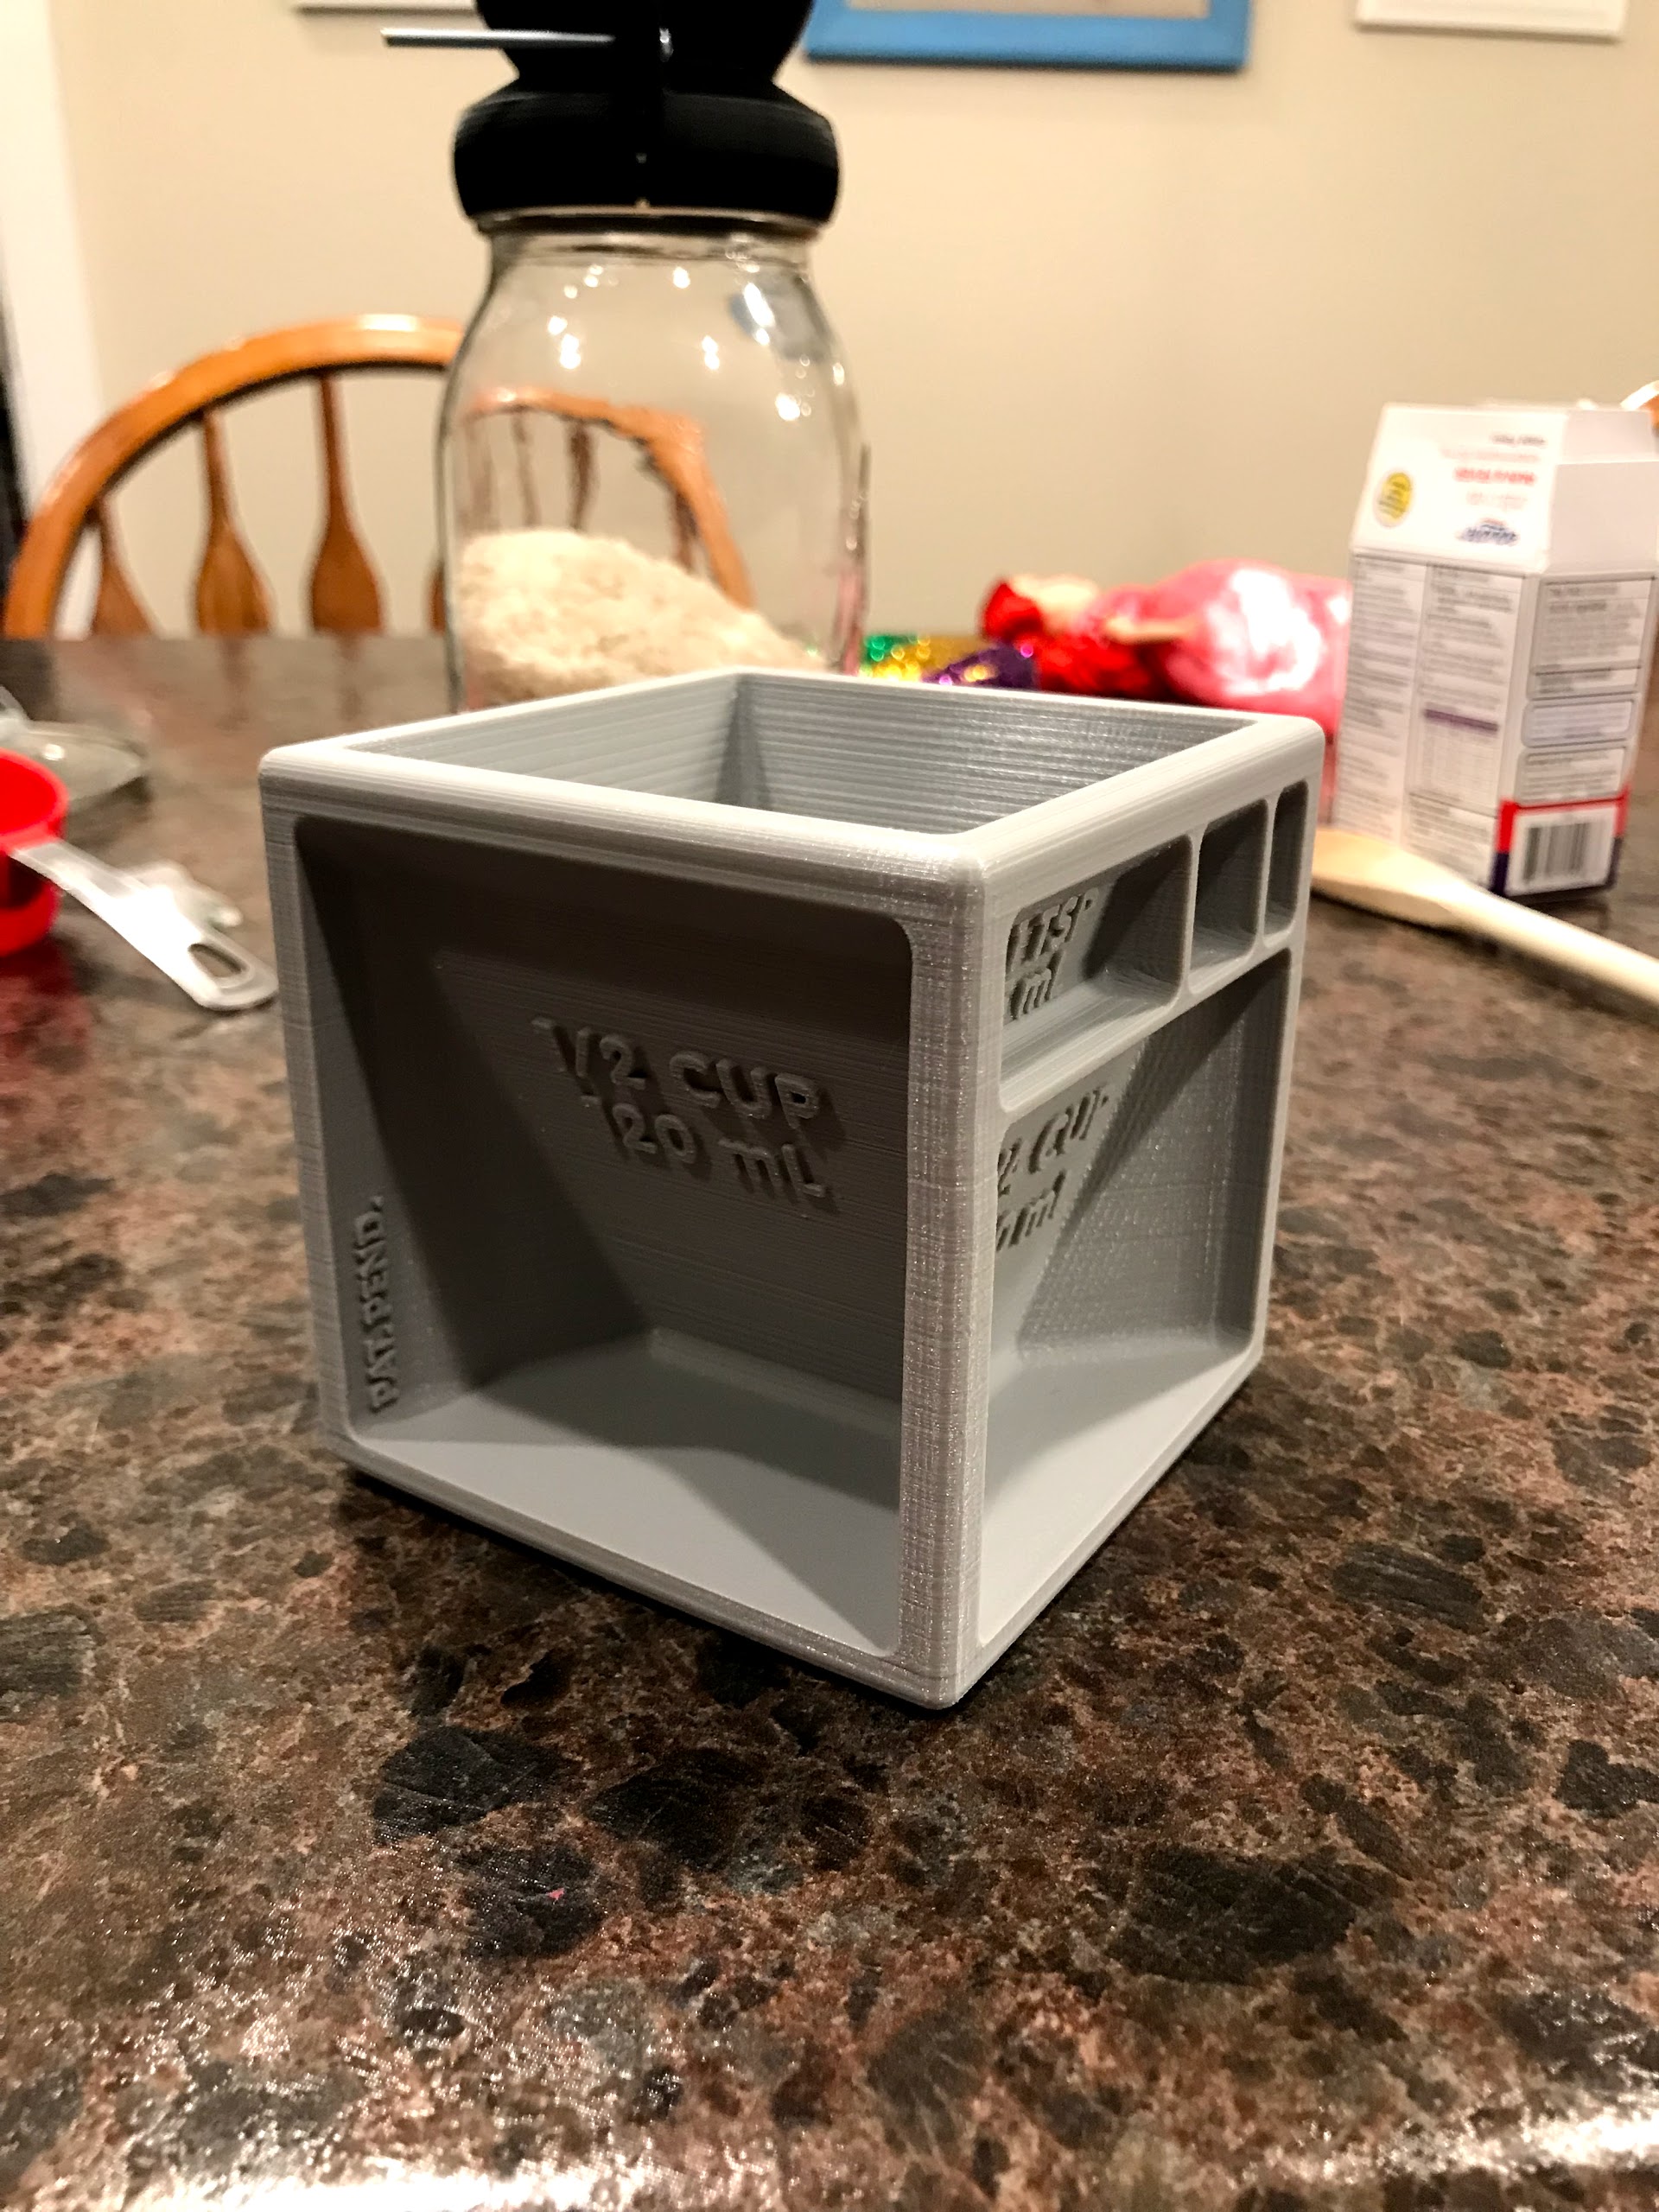 A measuring cube for the kitchen drawer! My wife's excited! Really